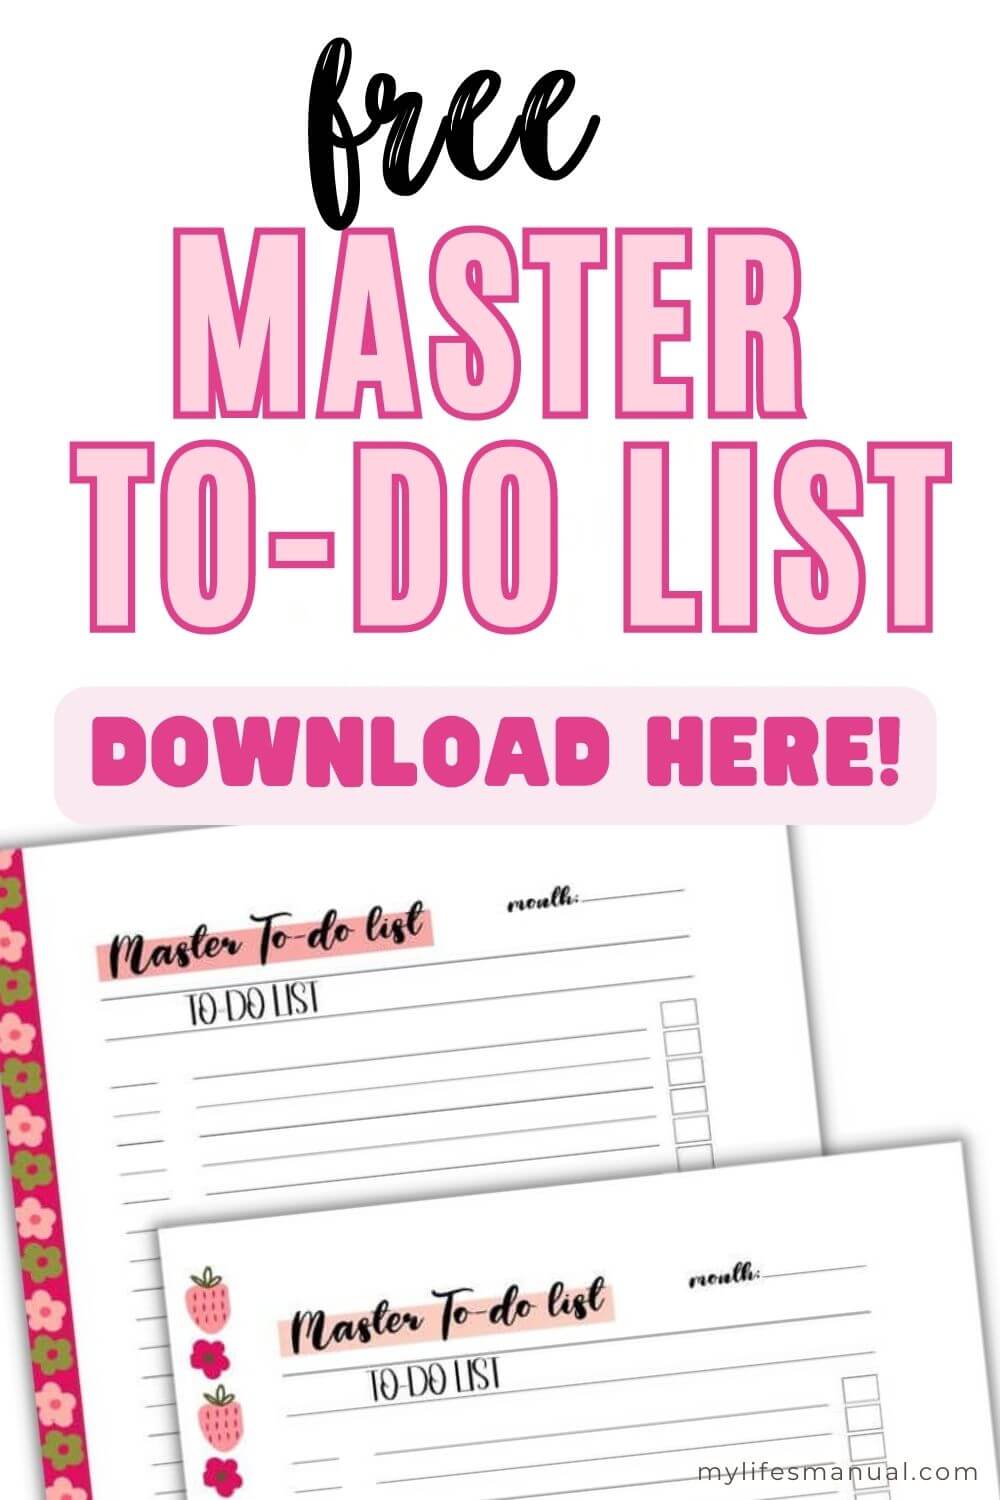 Free Master To-do List Printable planner for your ides, goals, and important things that you don't want to forget. Click to download the free printable master to do list.